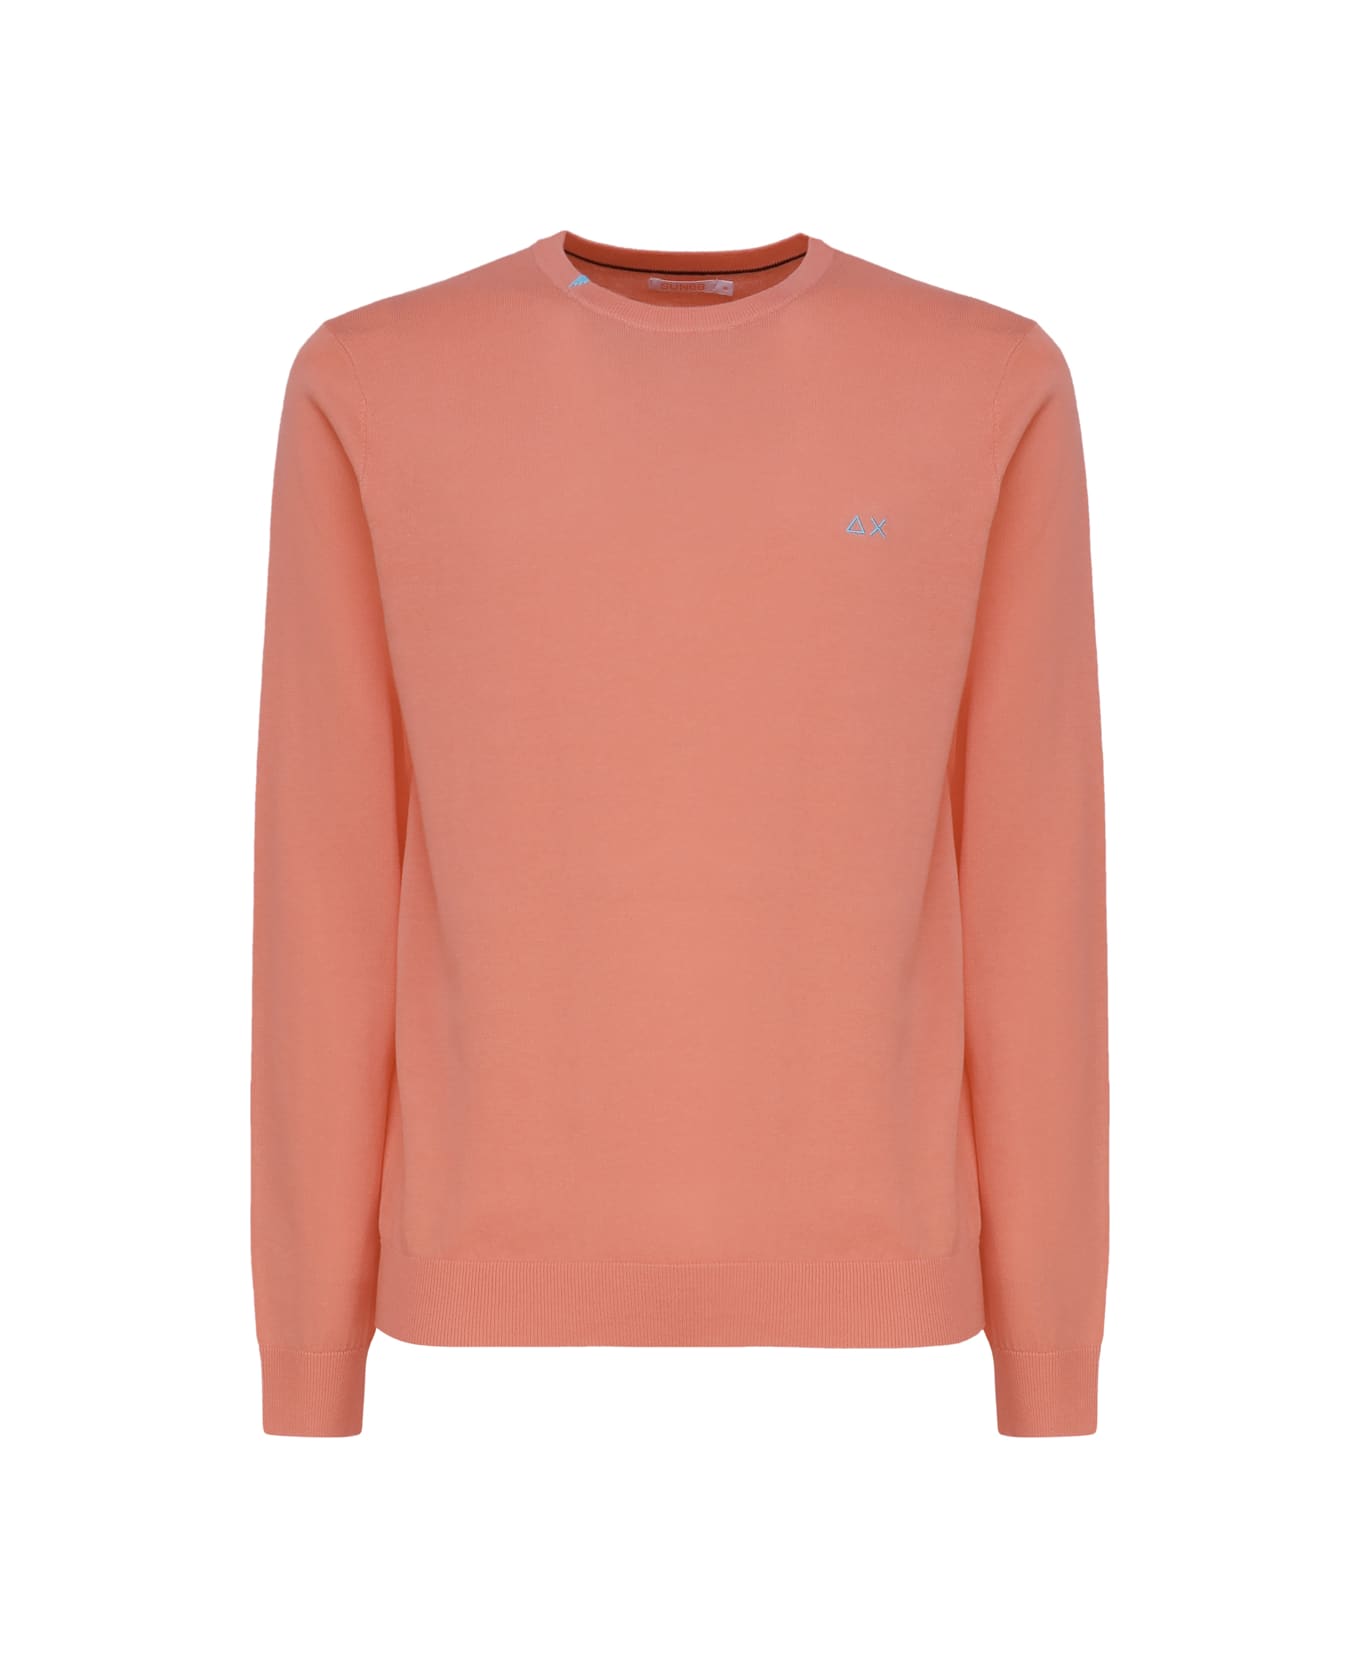 Sun 68 Sweater With Logo - Pink